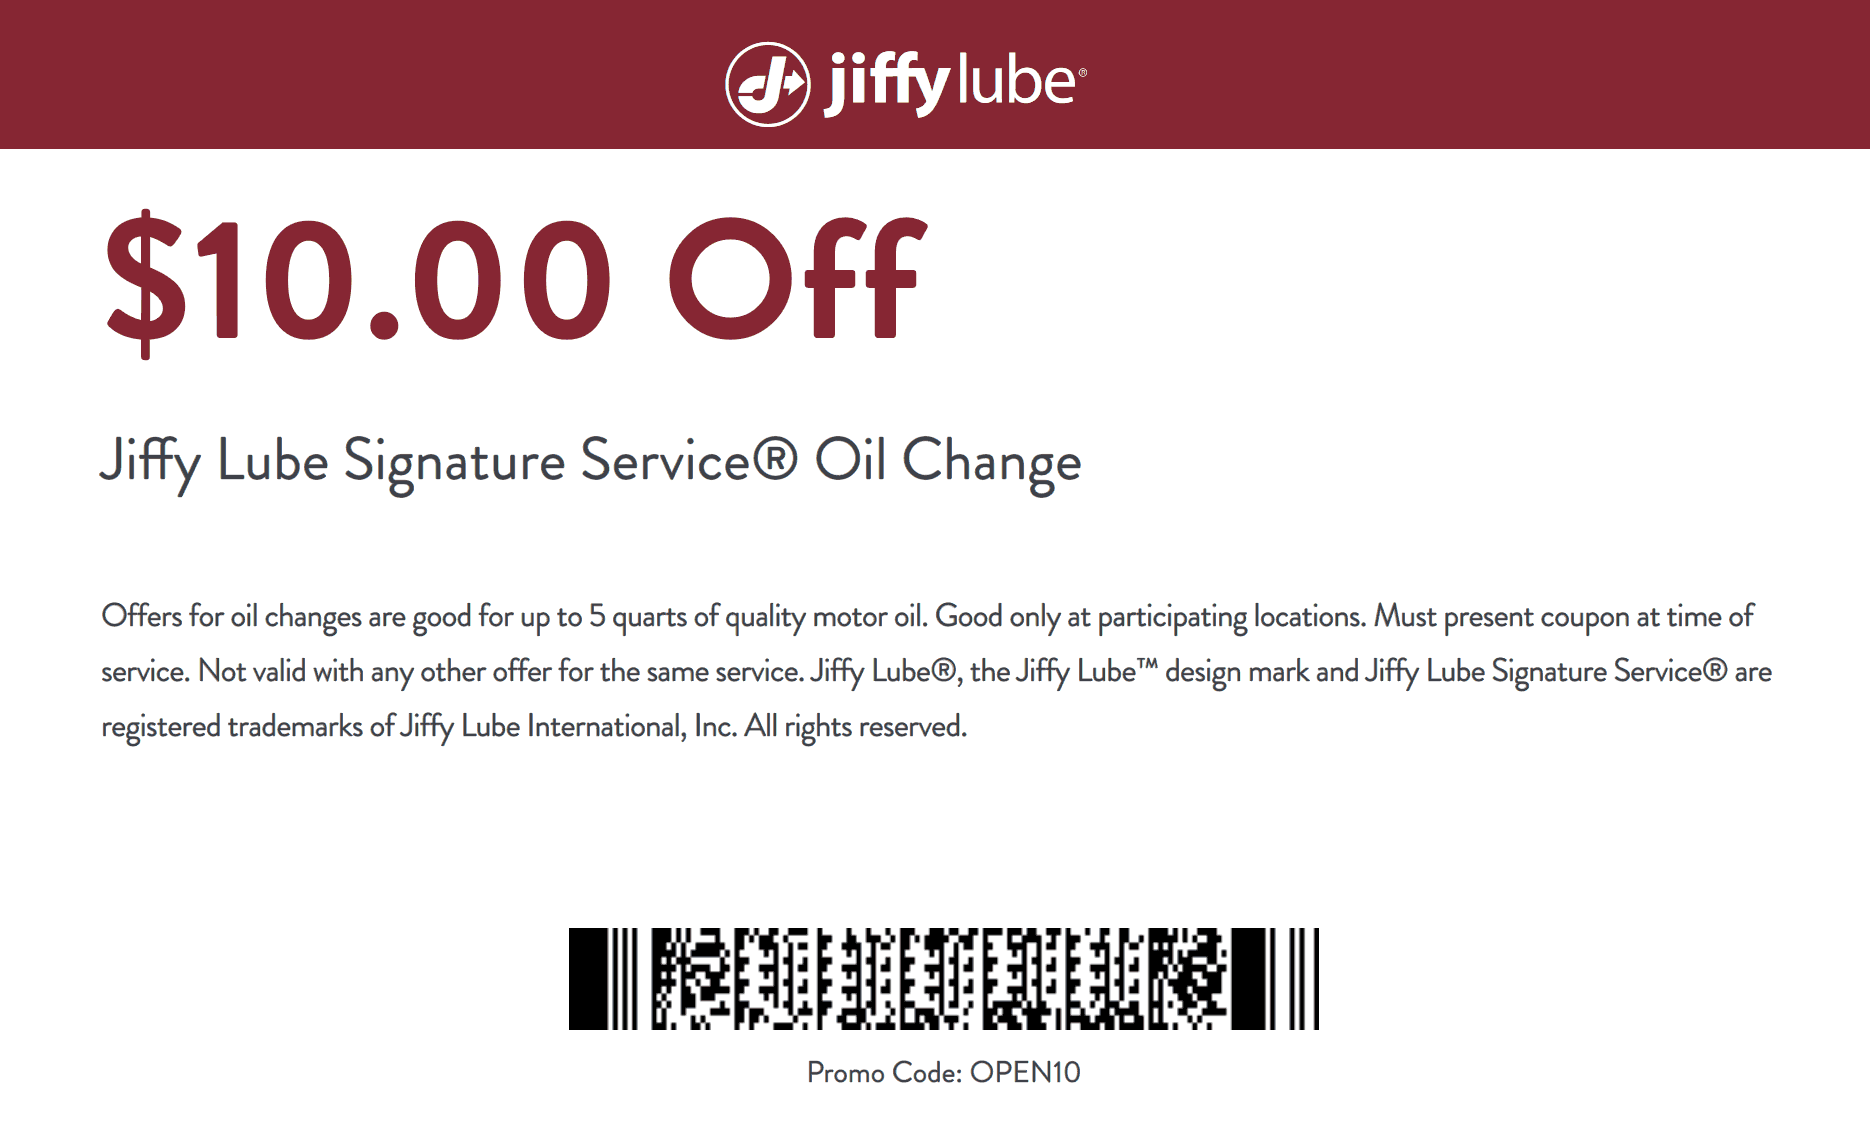 Jiffy Lube stores Coupon  $10 off signature oil change at Jiffy Lube #jiffylube